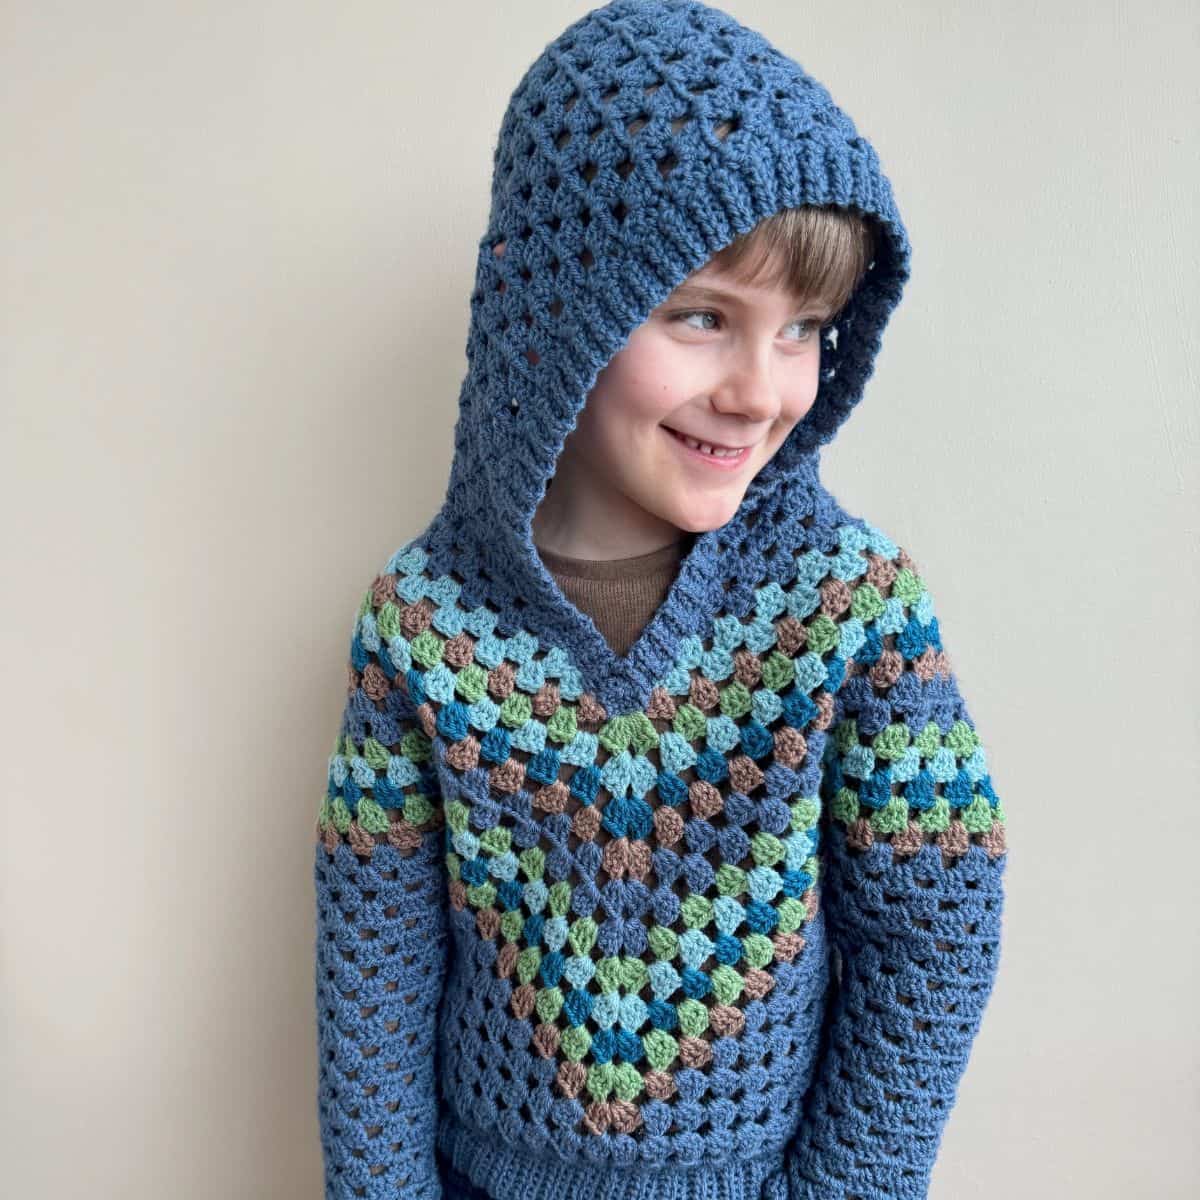 A child wearing a blue hoodie.